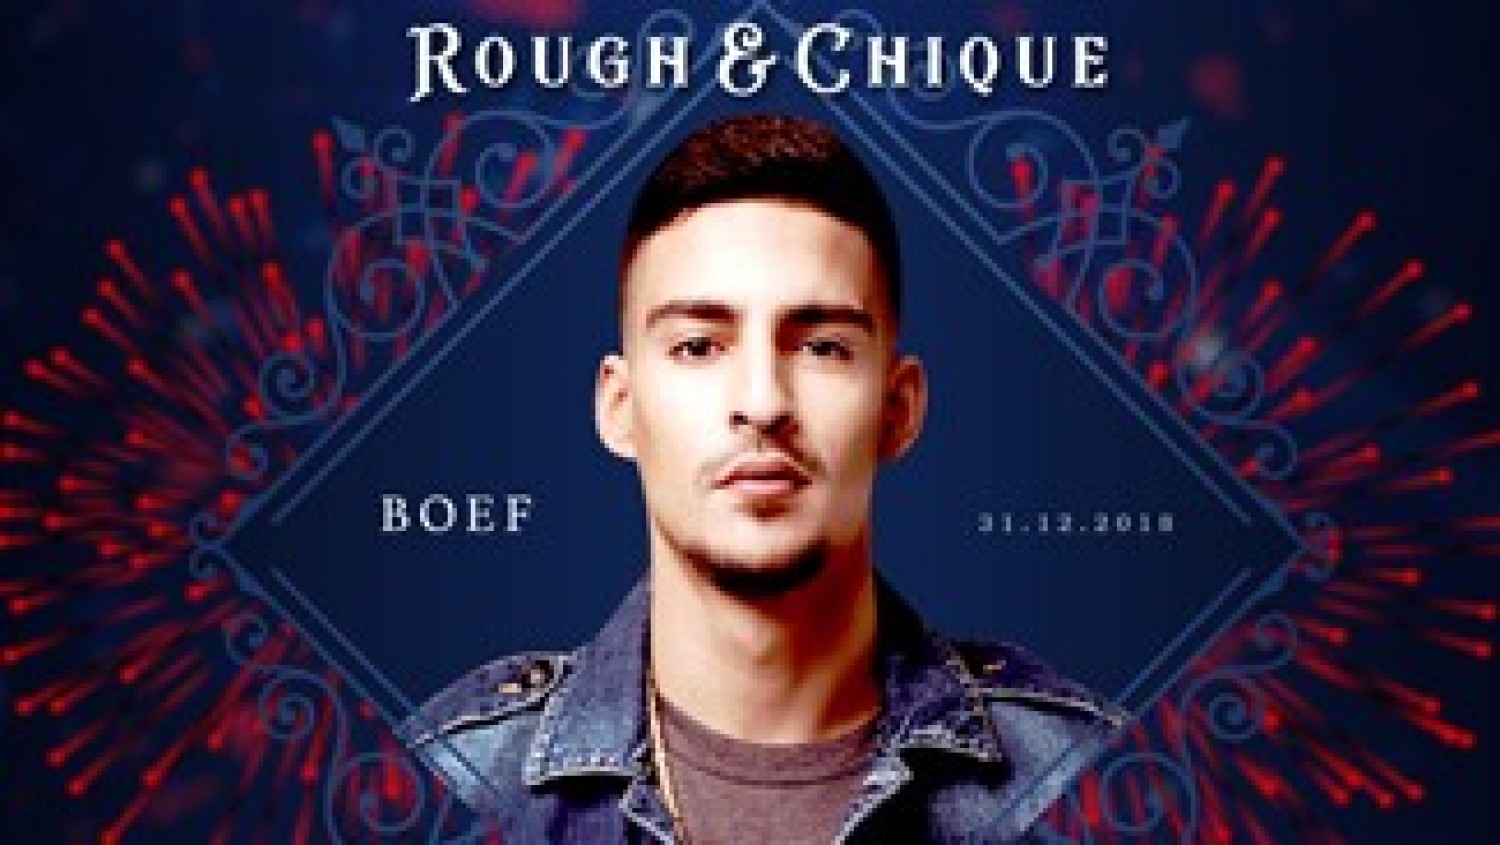 Party nieuws: Vier New Years Eve in The BOX tijdens Rough & Chique